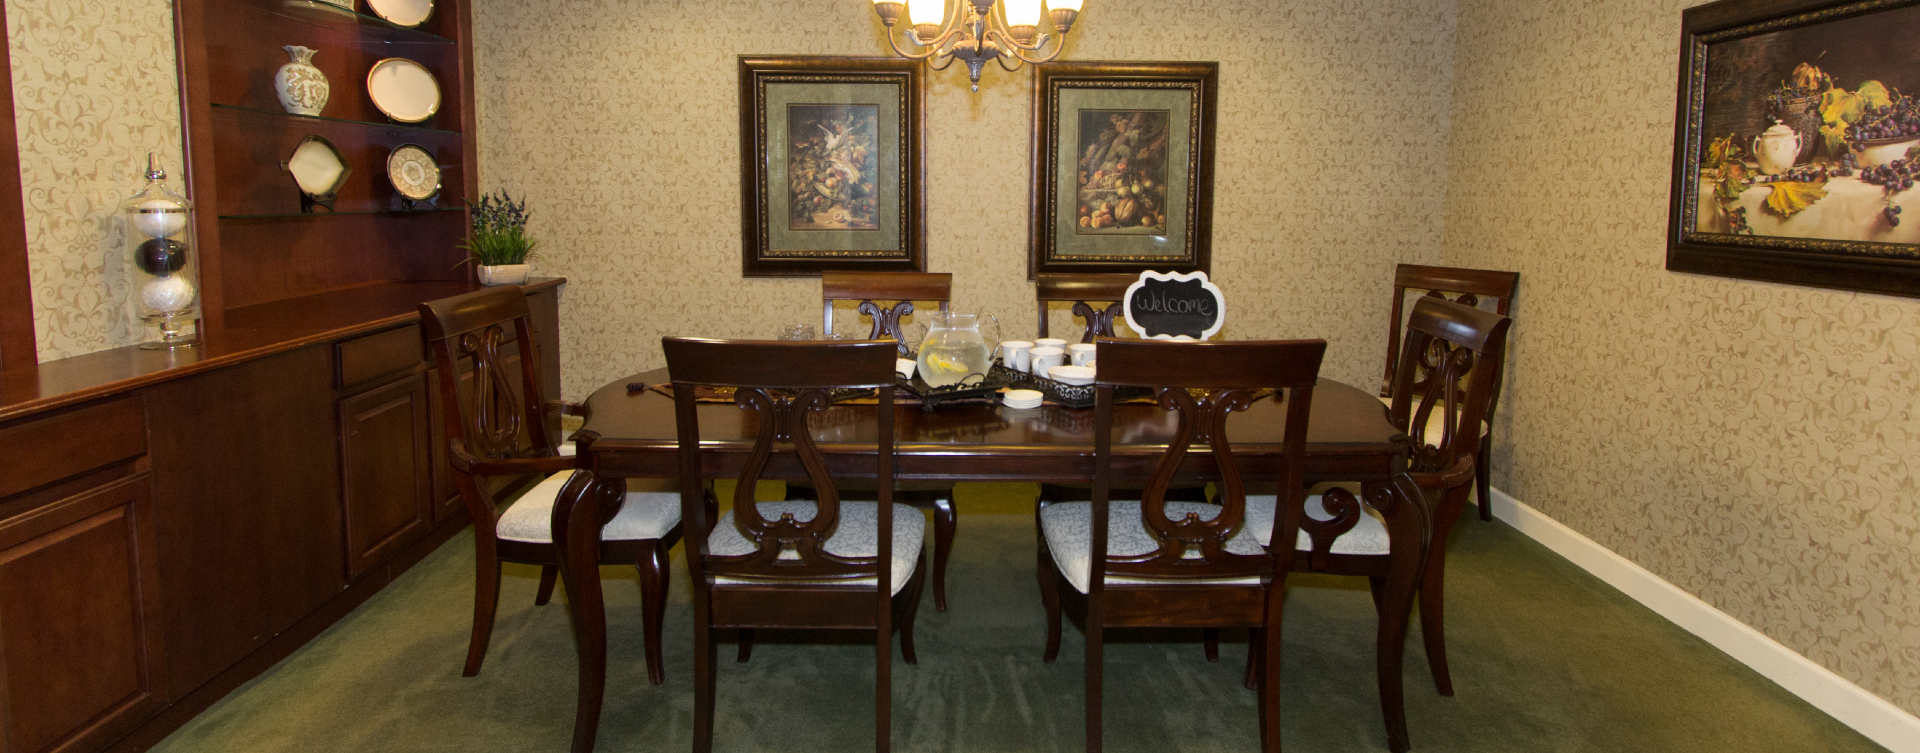 Have fun with themed and holiday meals in the private dining room at Bickford of St. Charles